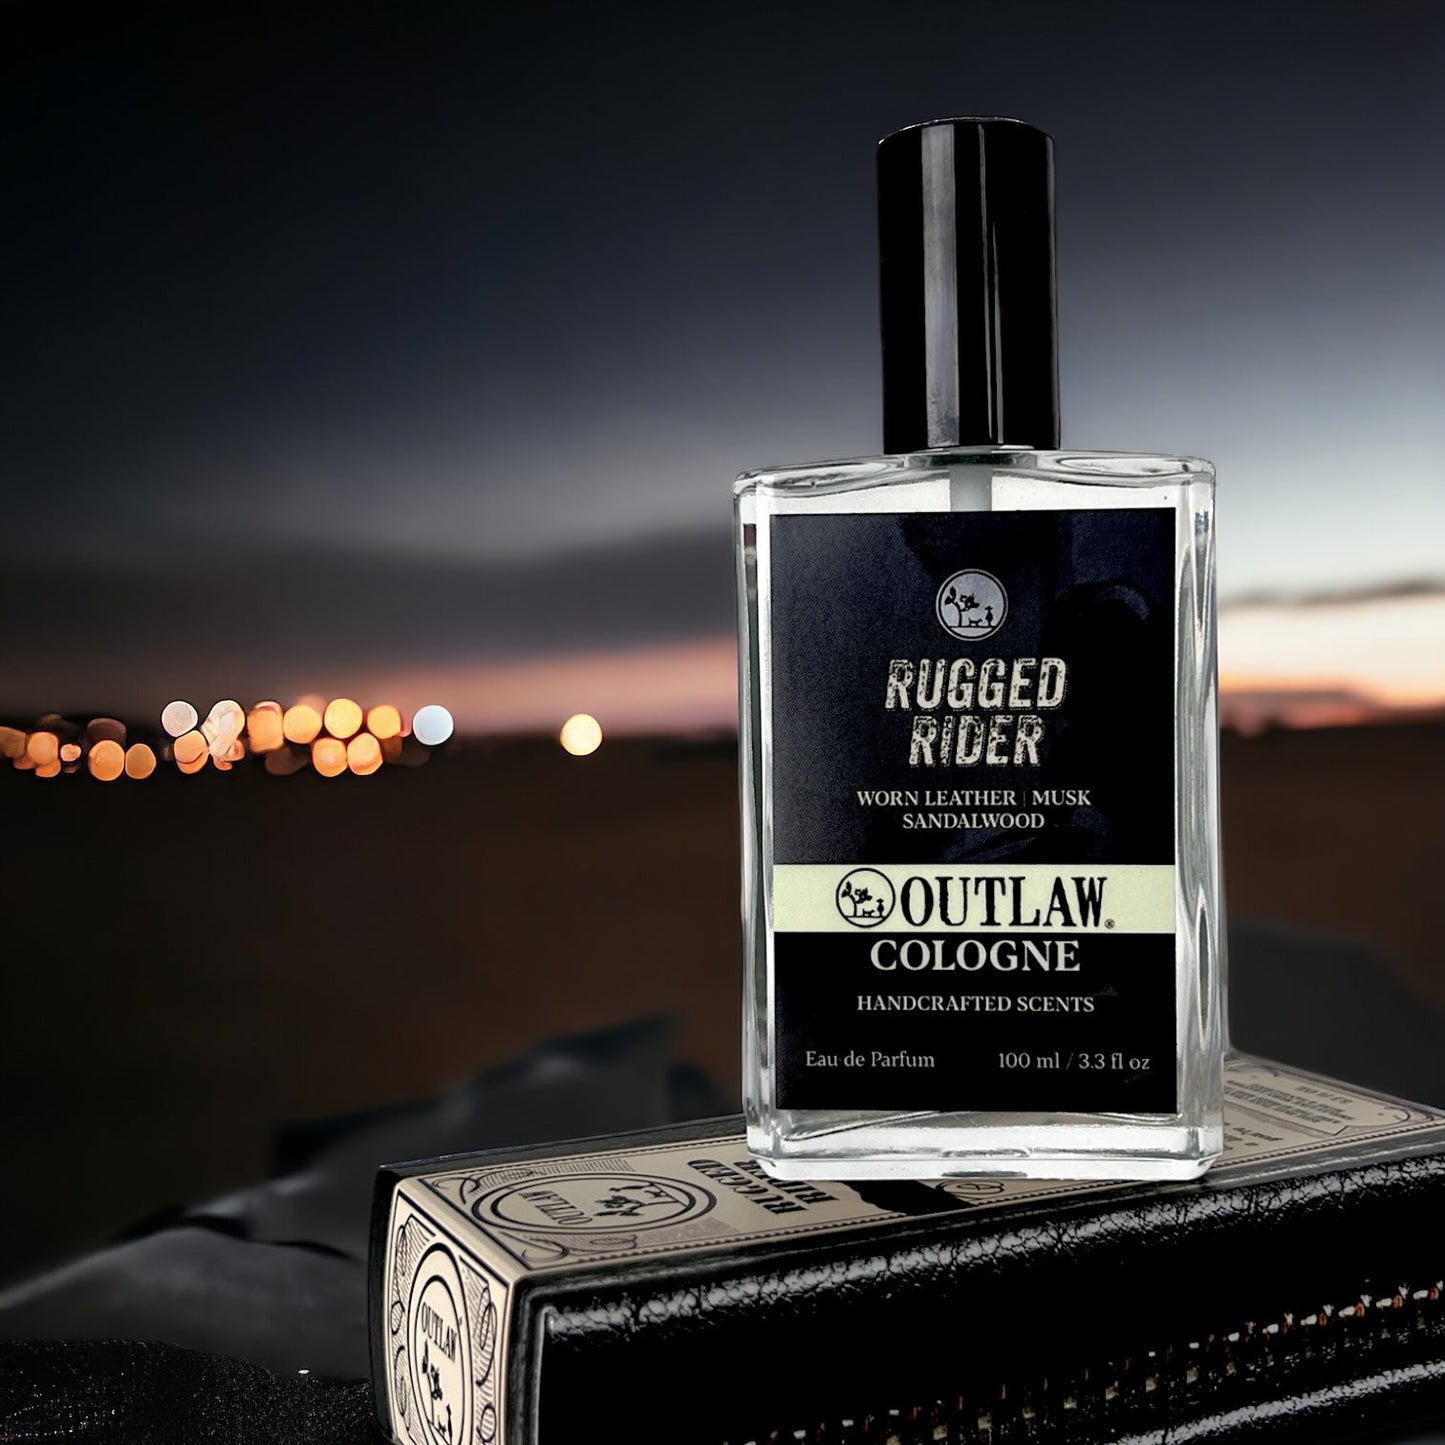 Rugged Rider Cologne